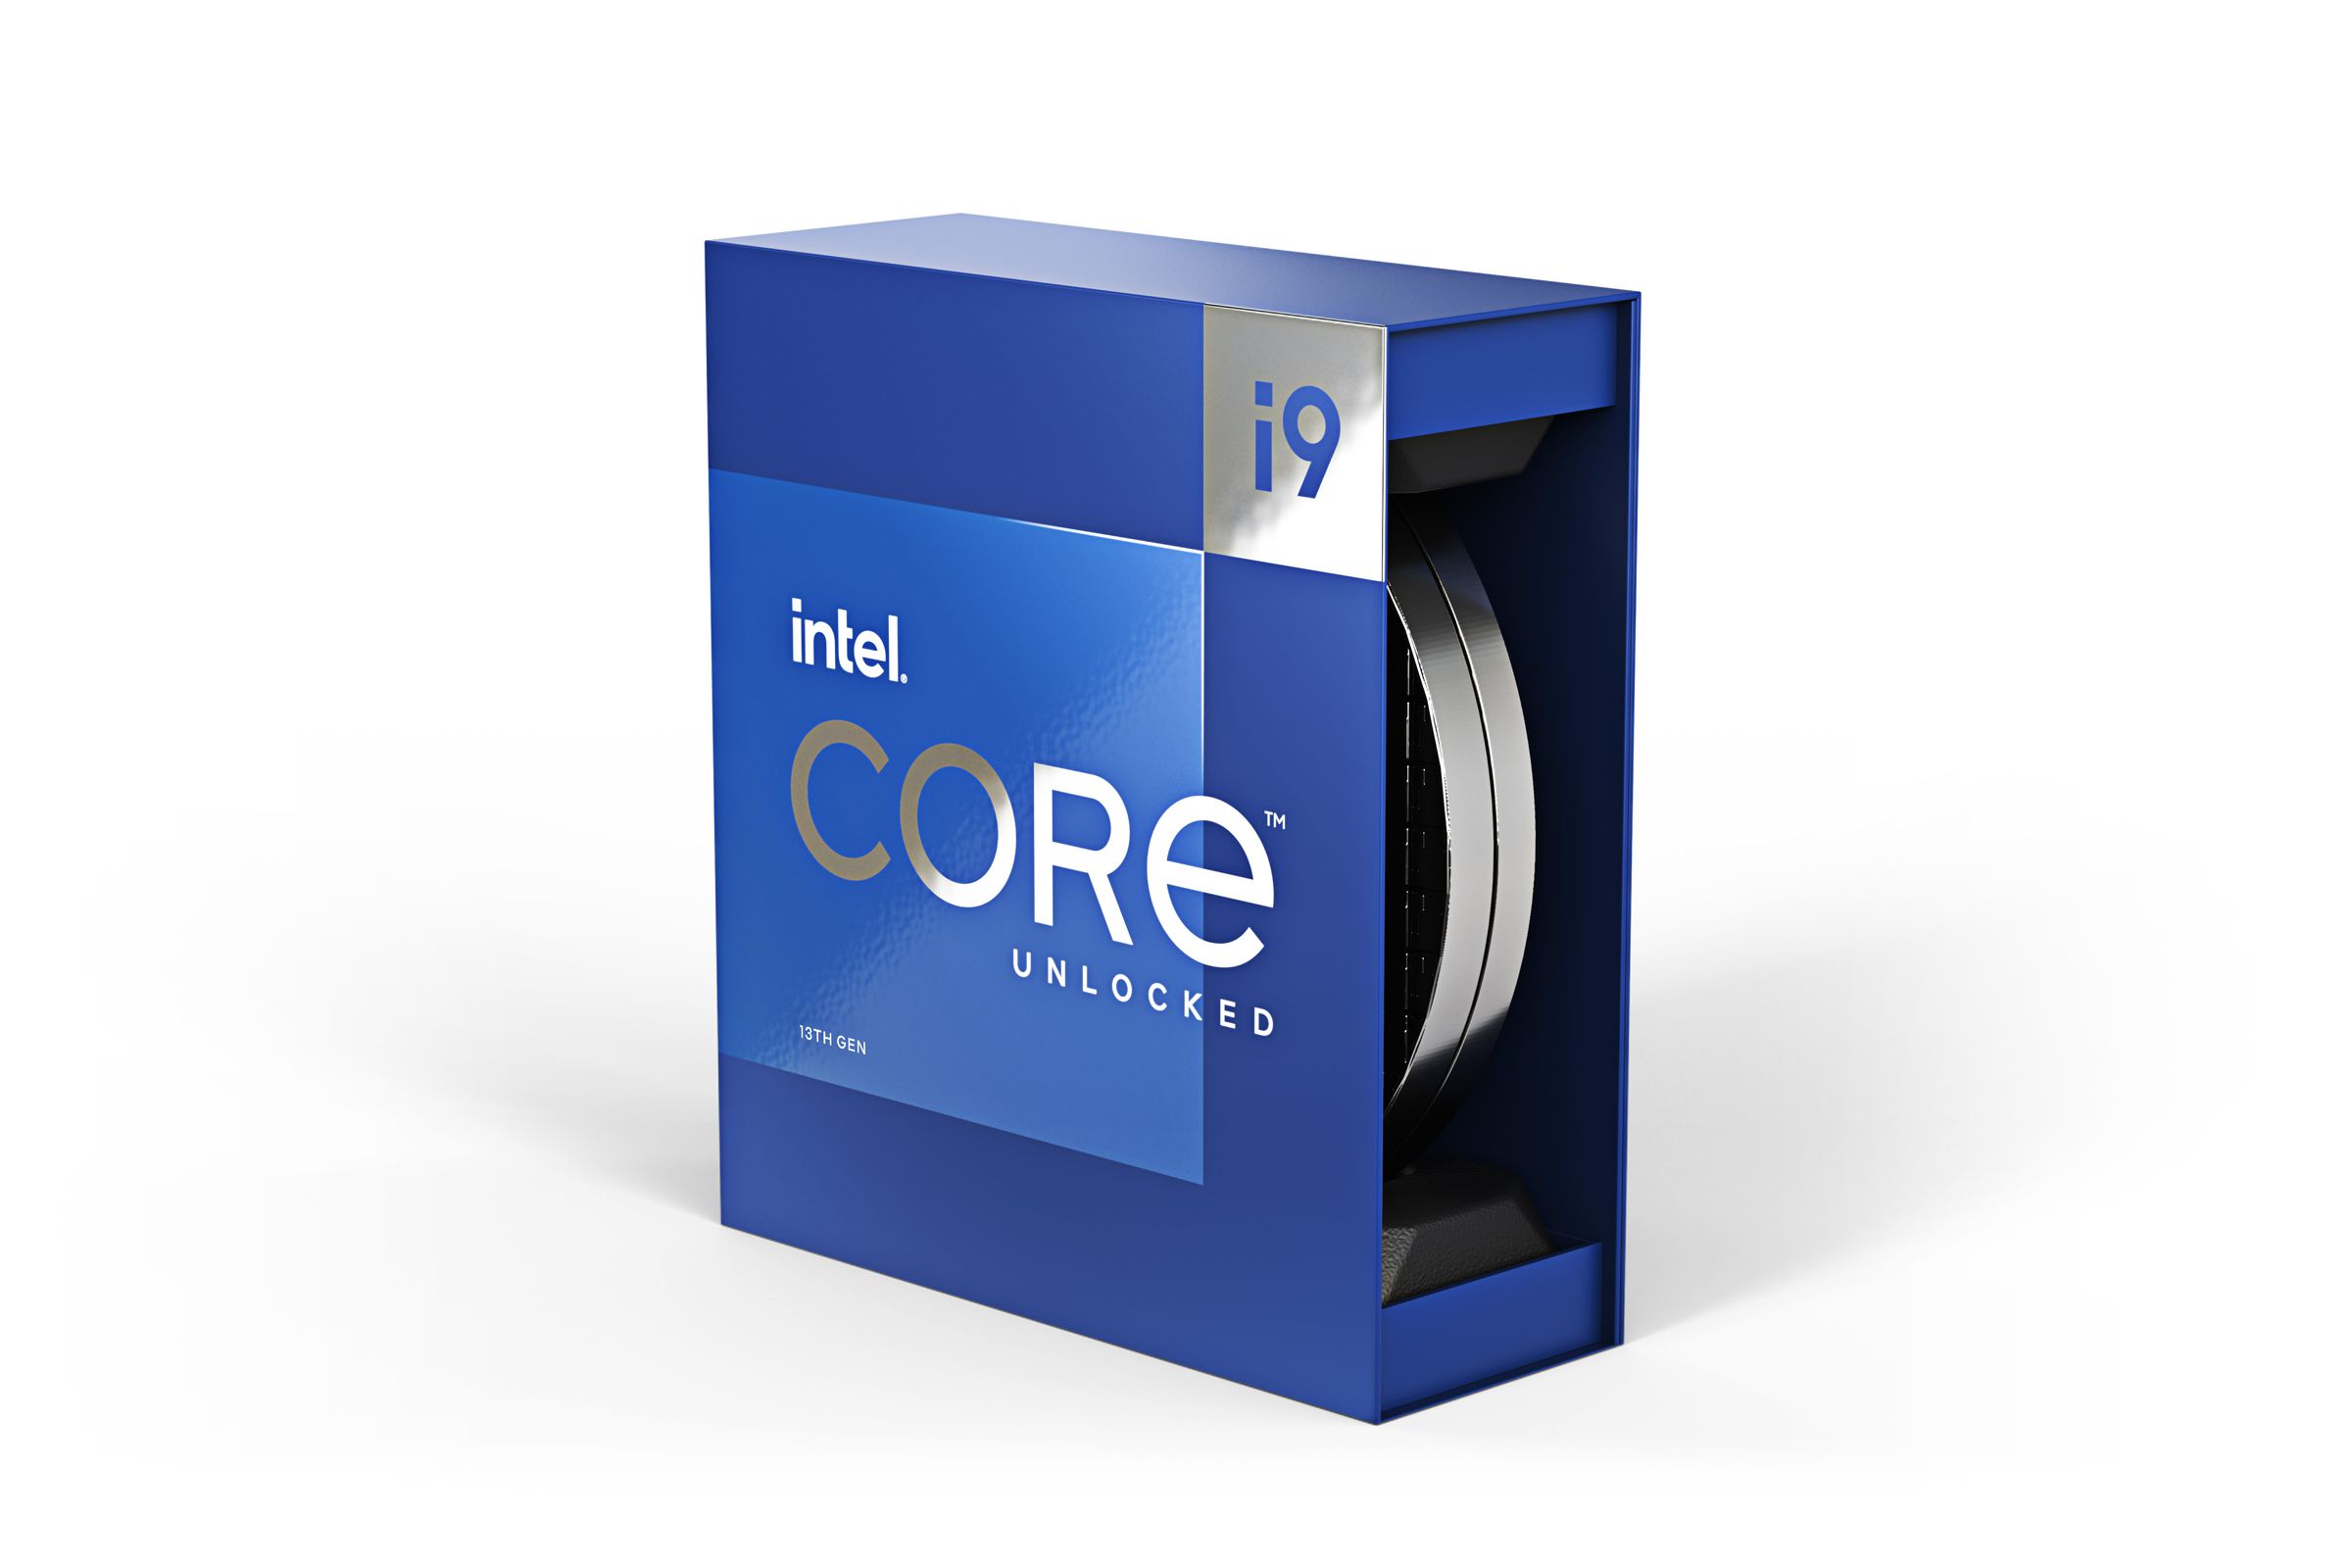 Packaging for Intel’s upcoming 13th Gen processors